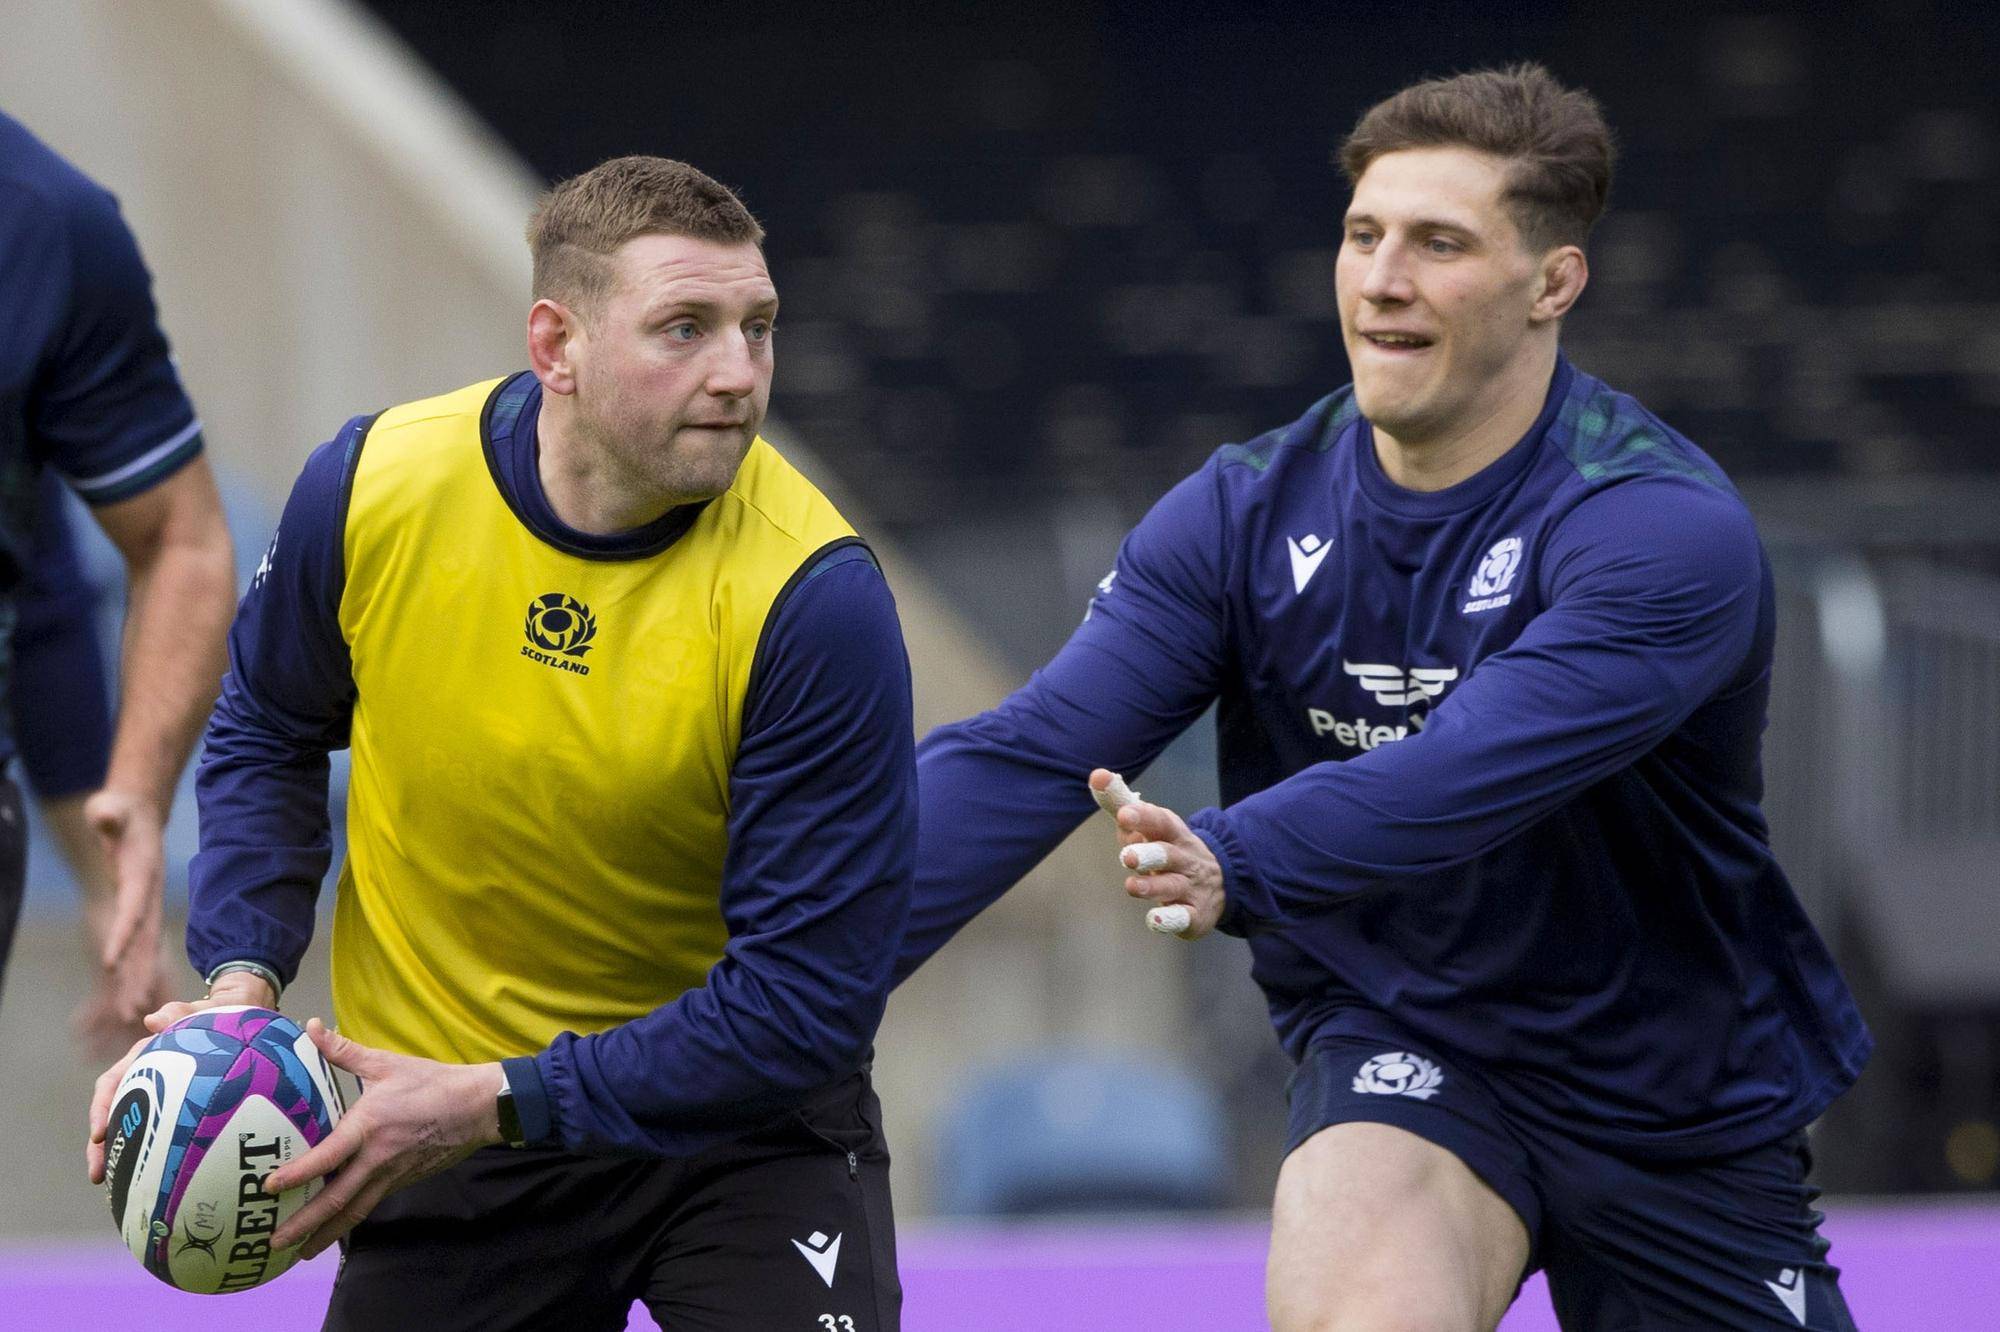 Scotland co-captains Finn Russell and Rory Darge during the team run at Murrayfield ahead of the Calcutta Cup clash against England. (Photo by Craig Williamson / SNS Group)